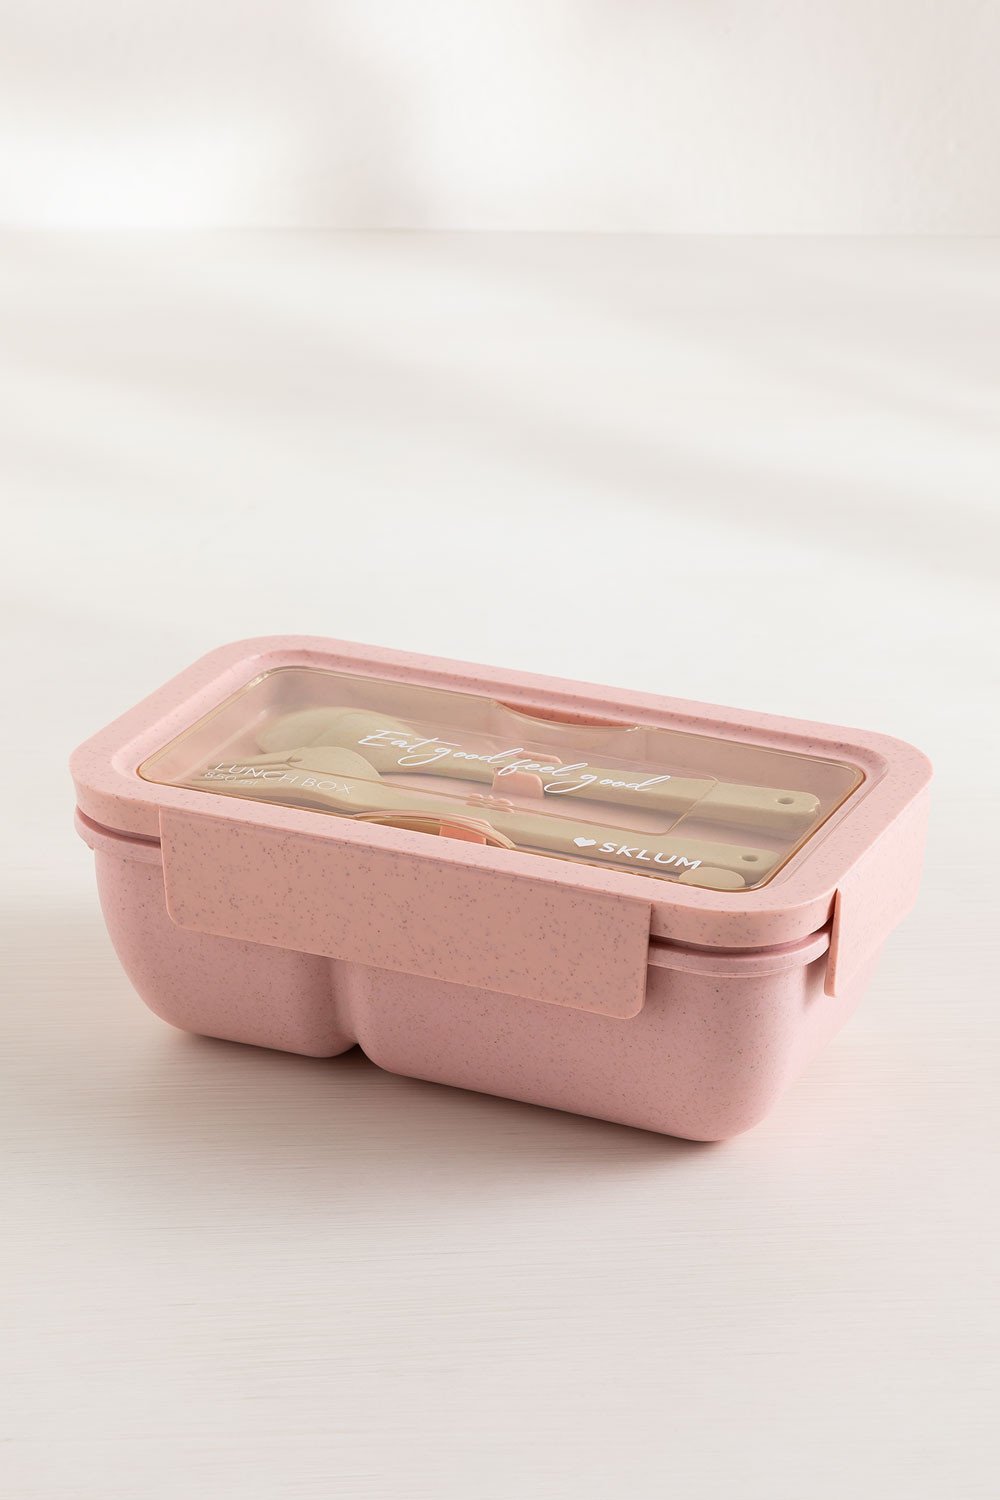 VEIOK Lunch Box, 1600ml Bento Box with Bag and Cutlery, Pink Lunch